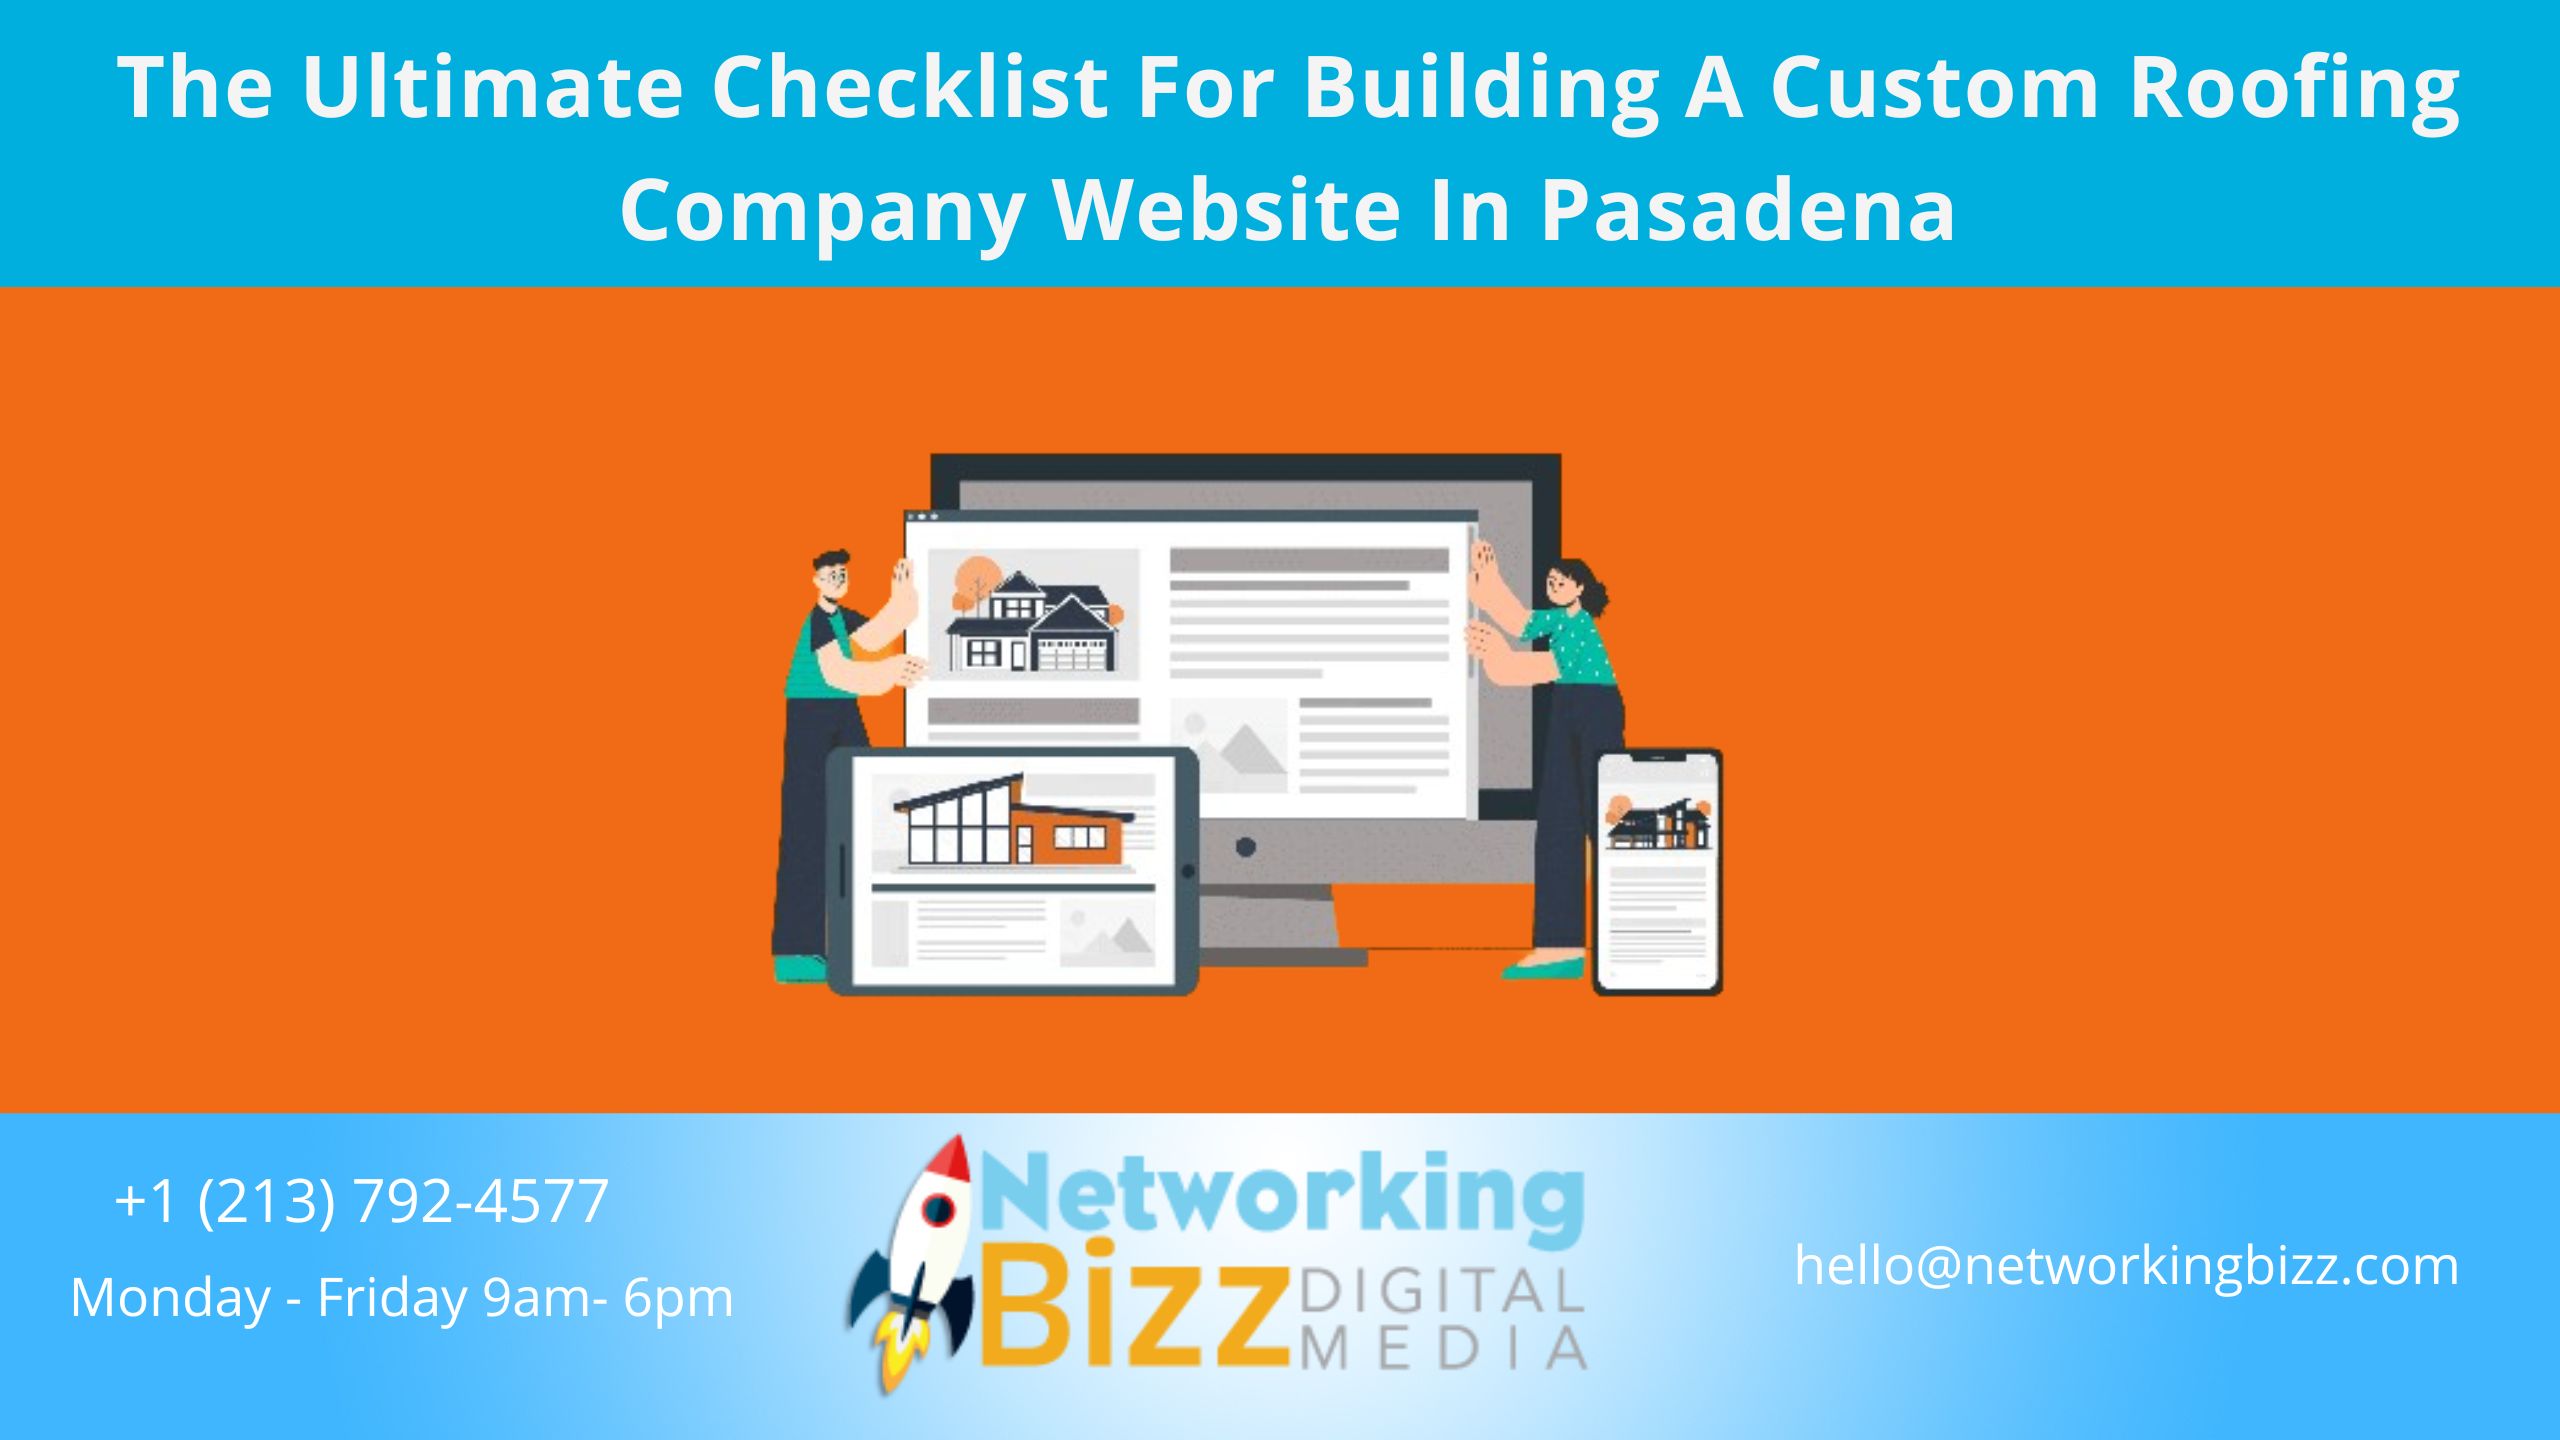 The Ultimate Checklist For Building A Custom Roofing Company Website In Pasadena